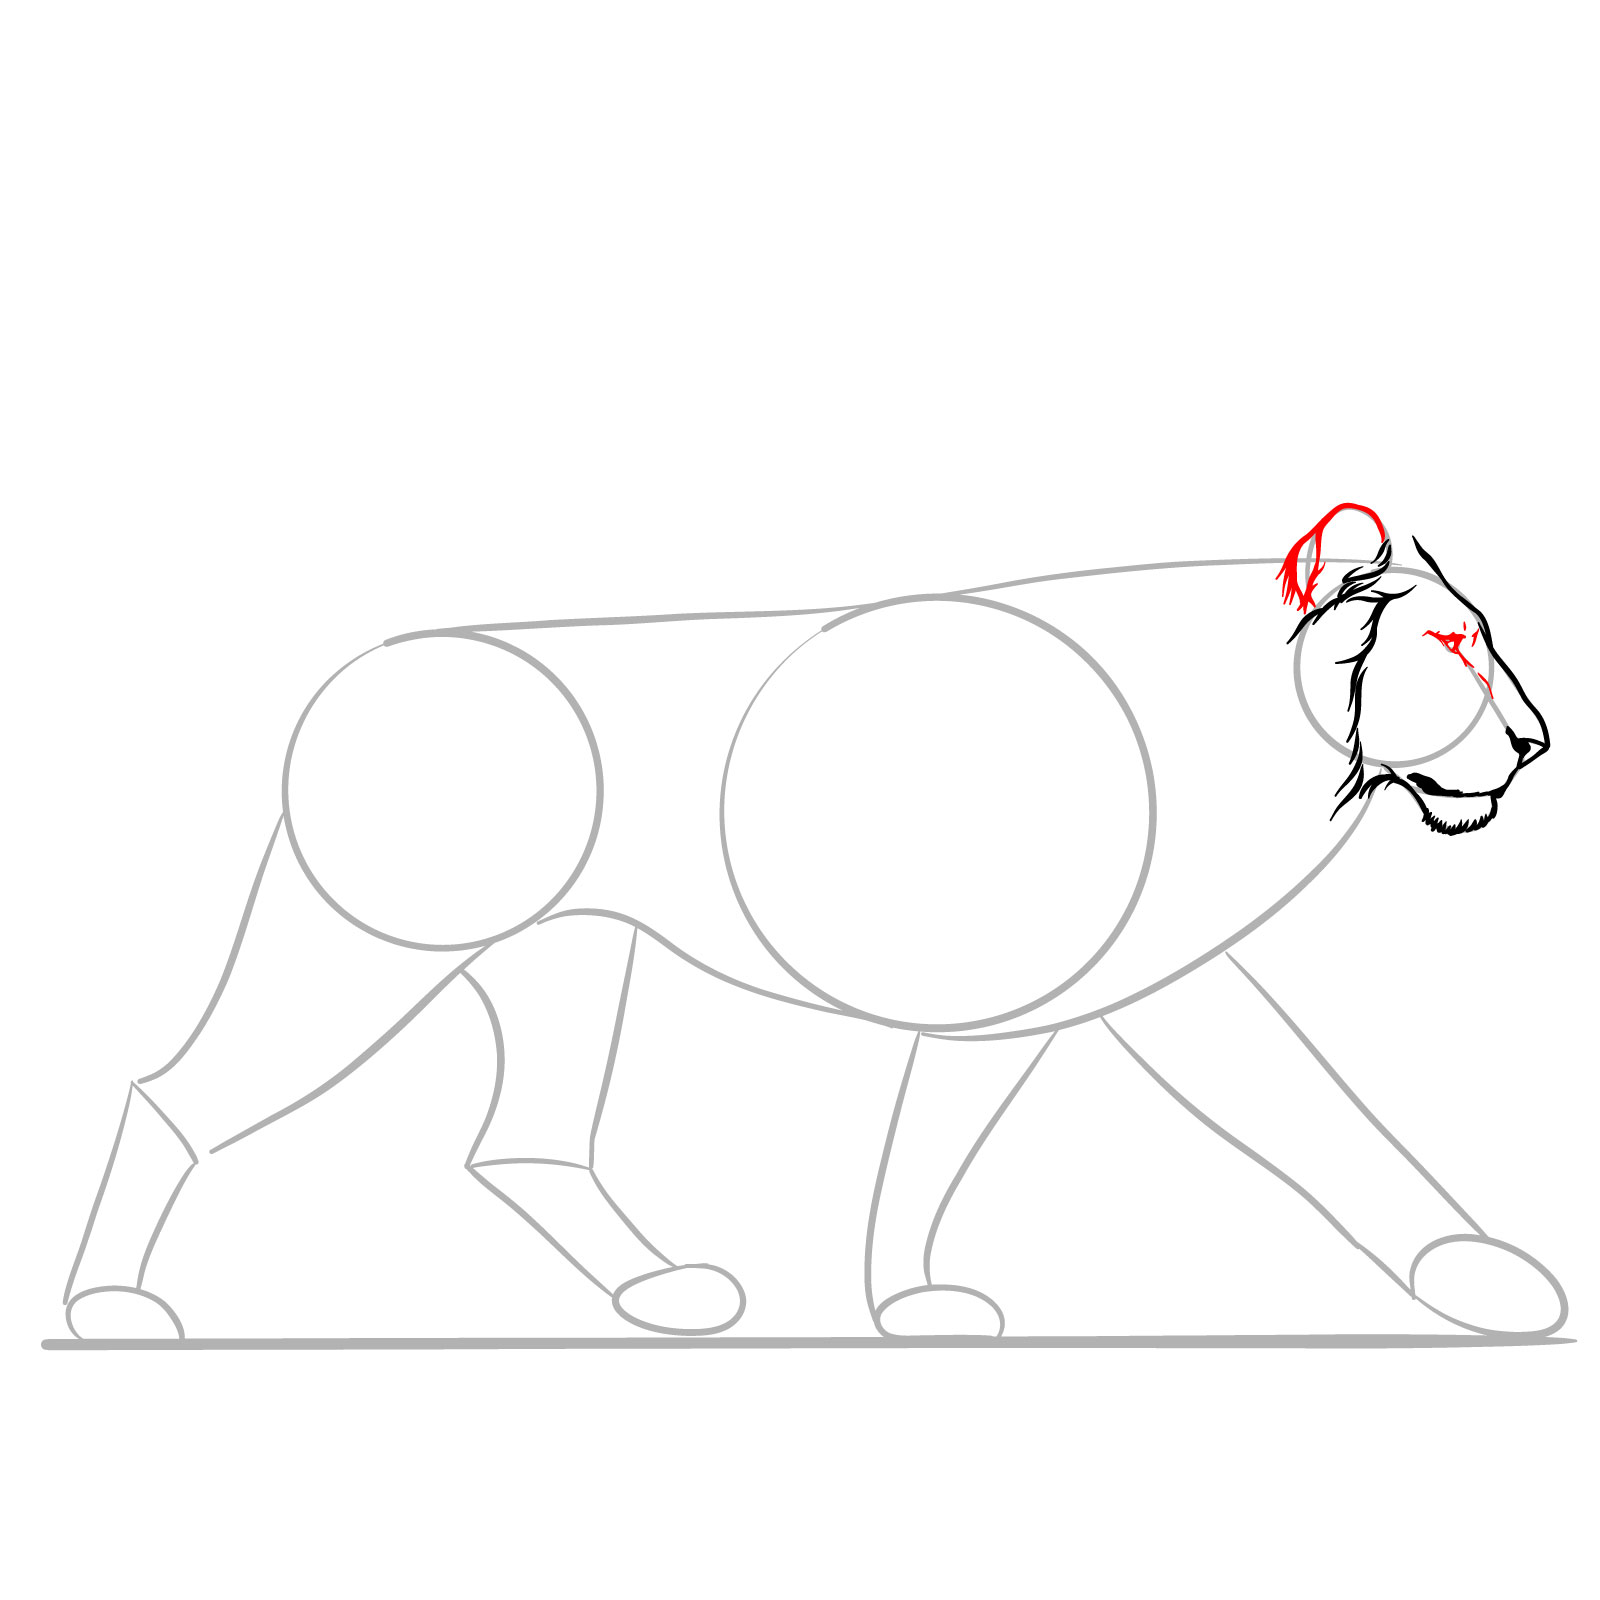 Step 5 in sketching a walking lion, adding the ear and eye - step 05